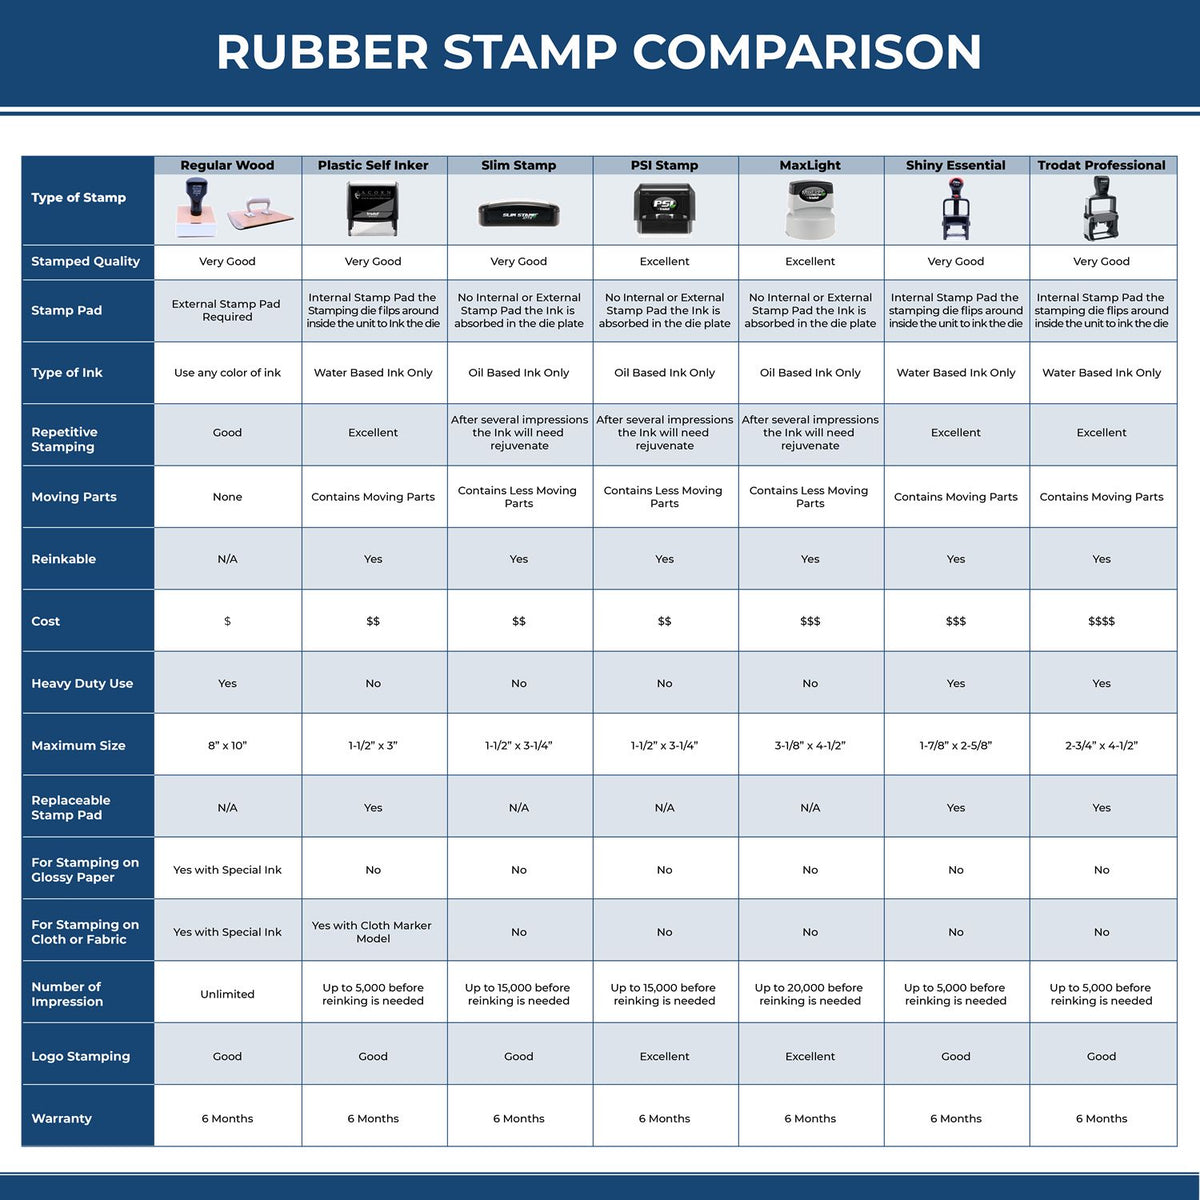 A comparison chart for the different types of mount models available for the Self-Inking Rectangular Rhode Island Notary Stamp.